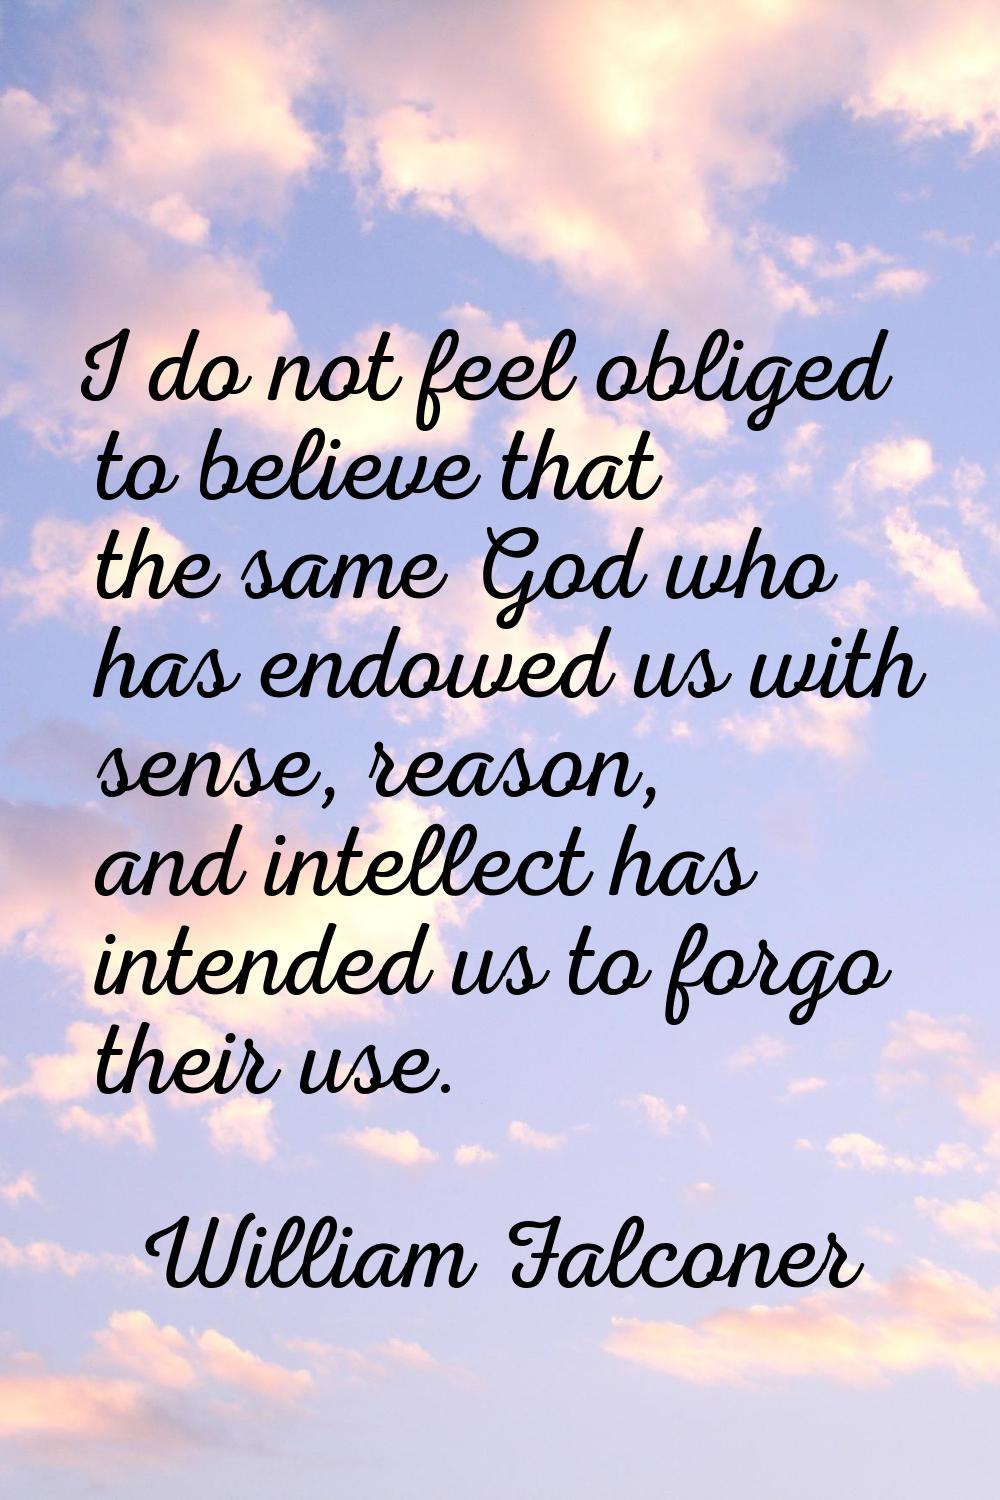 I do not feel obliged to believe that the same God who has endowed us with sense, reason, and intel